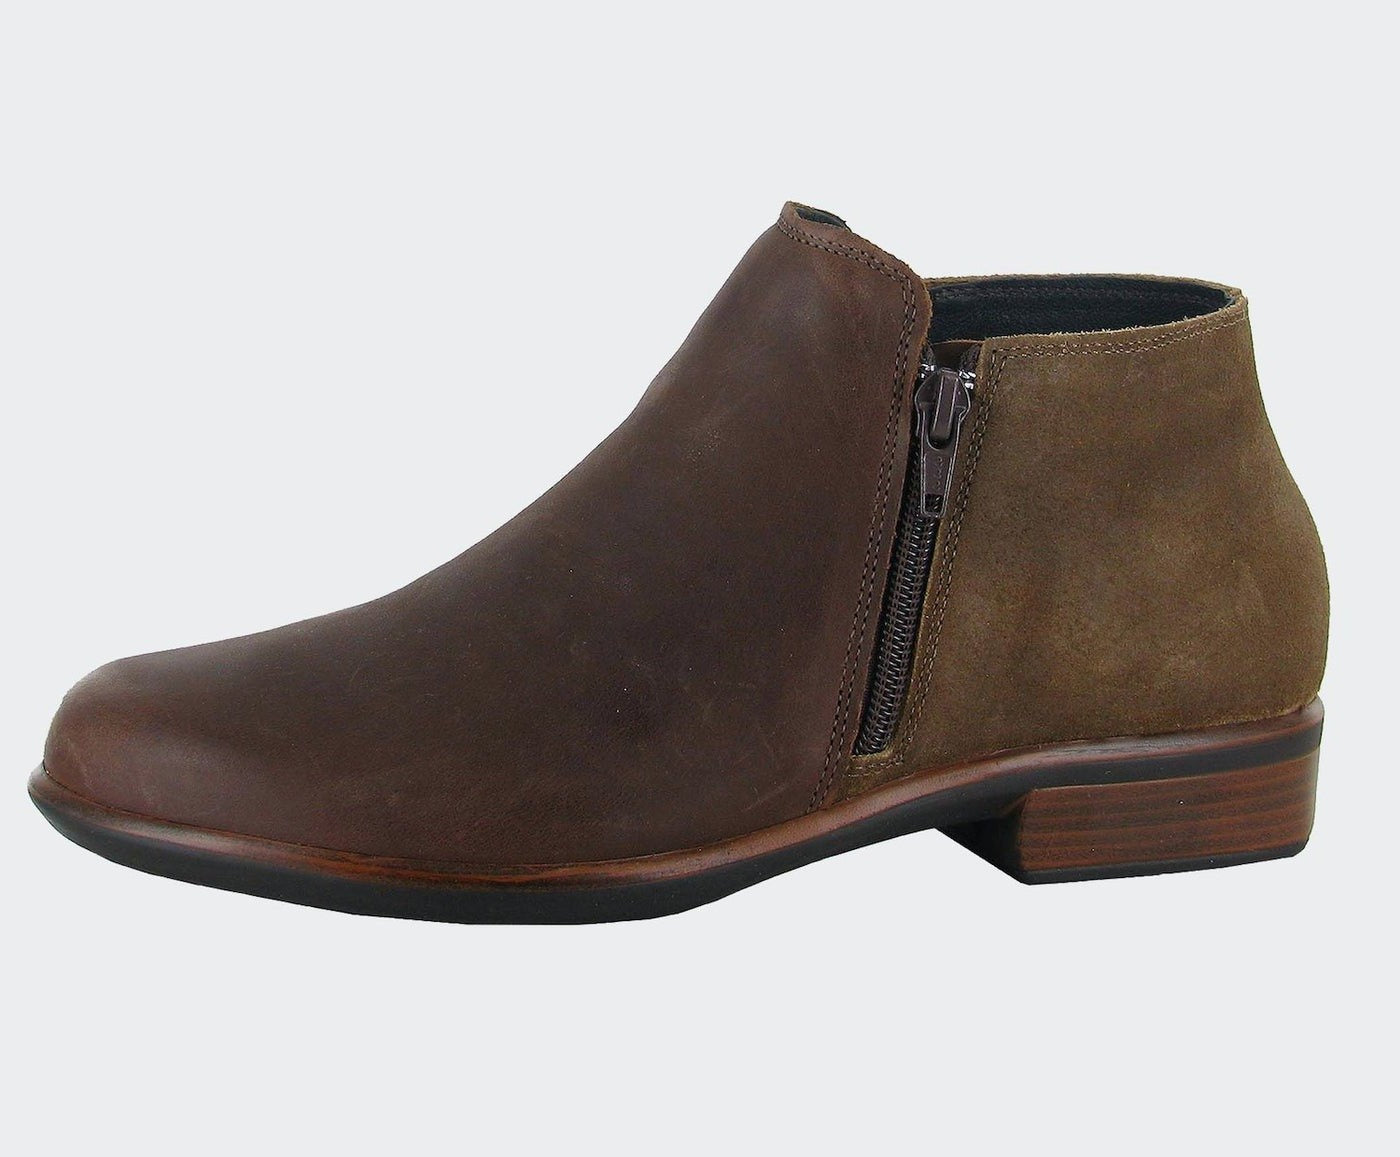 Helm | Leather/Suede | Soft Cognac/Antique Brown - Boot - Naot